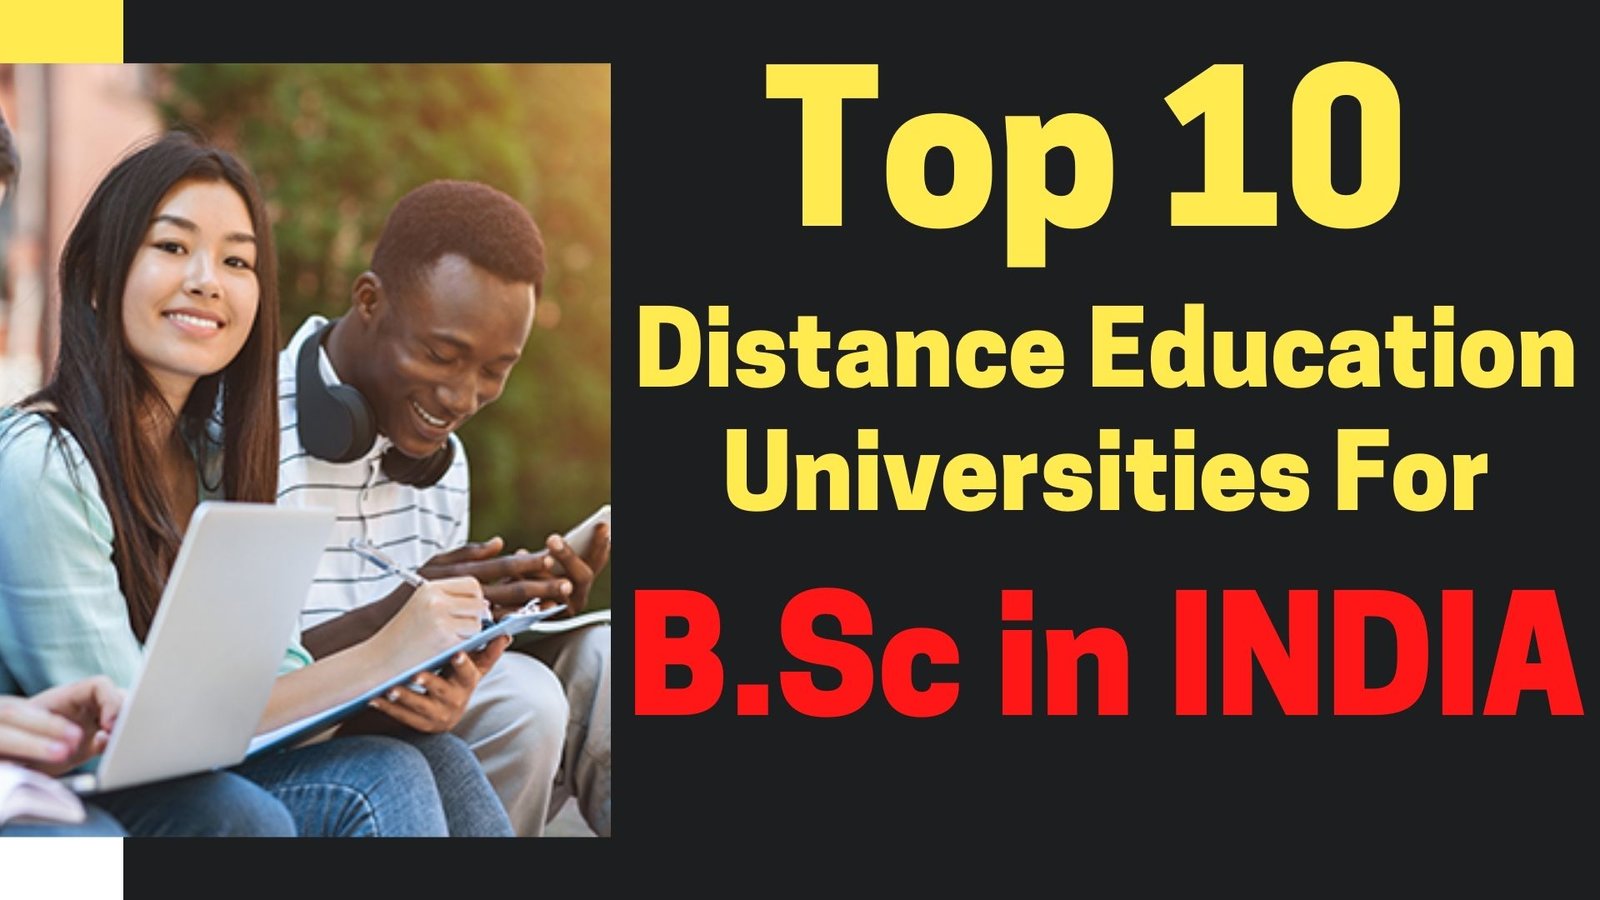 Top 10 Distance Education Universities for Bachelor of Science (B.Sc.) in India